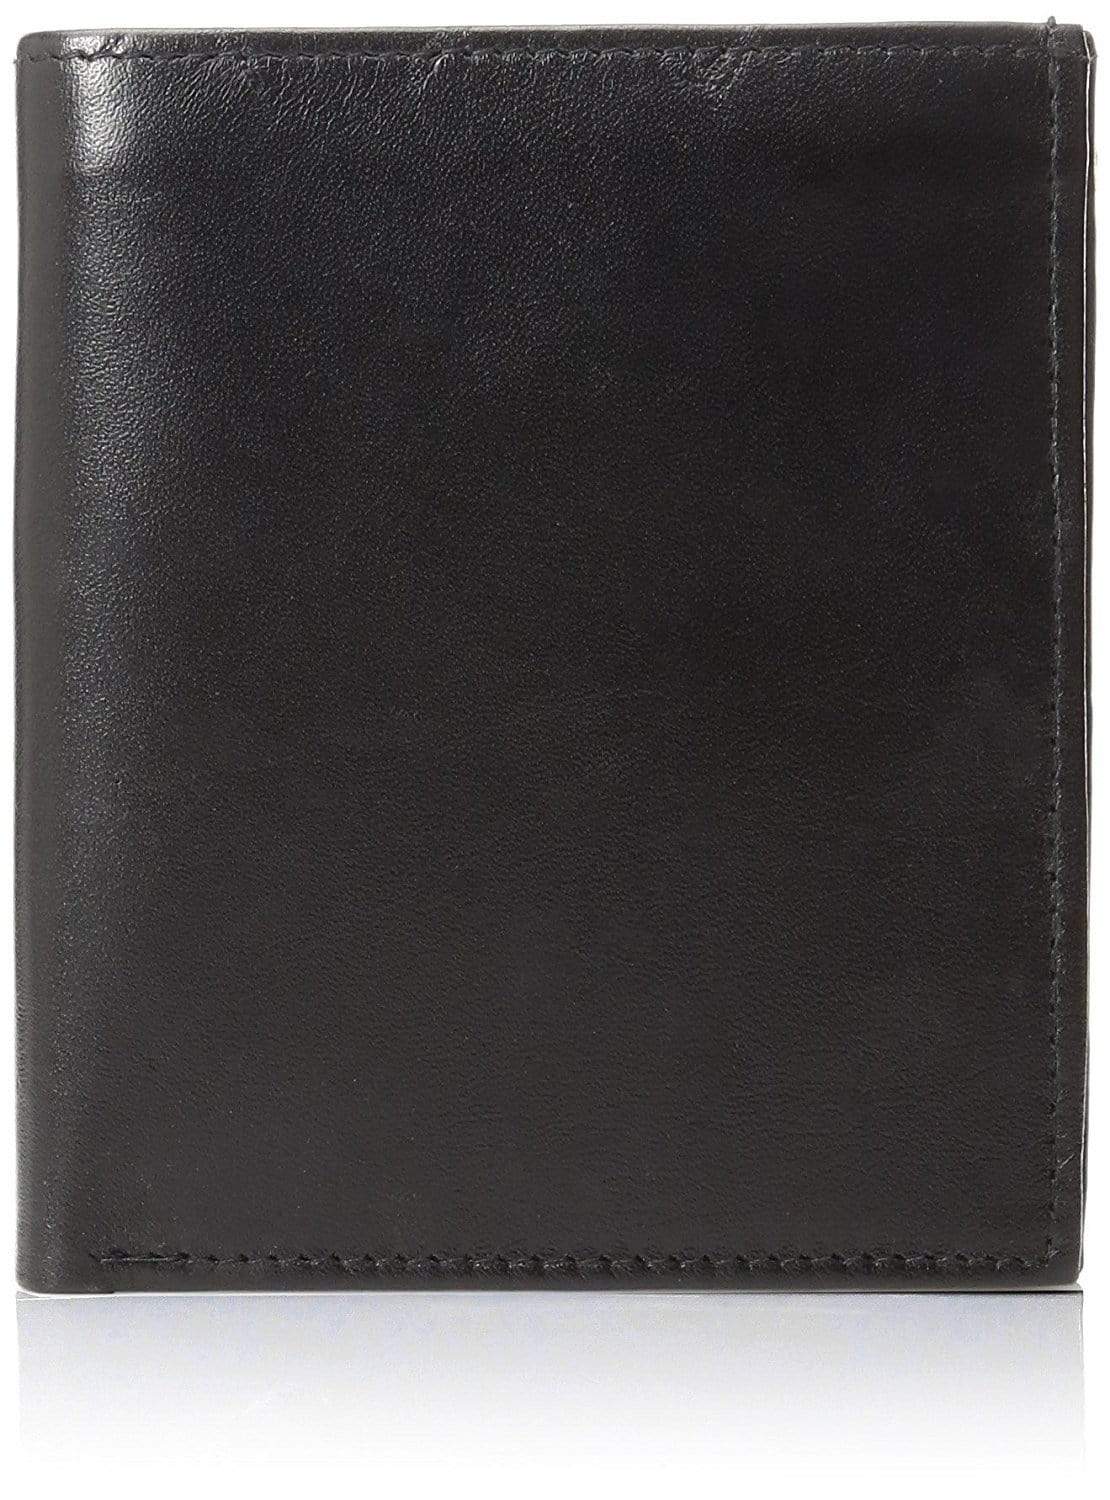 COOPER Leather Bifold Hipster Wallet - Improving Lifestyles